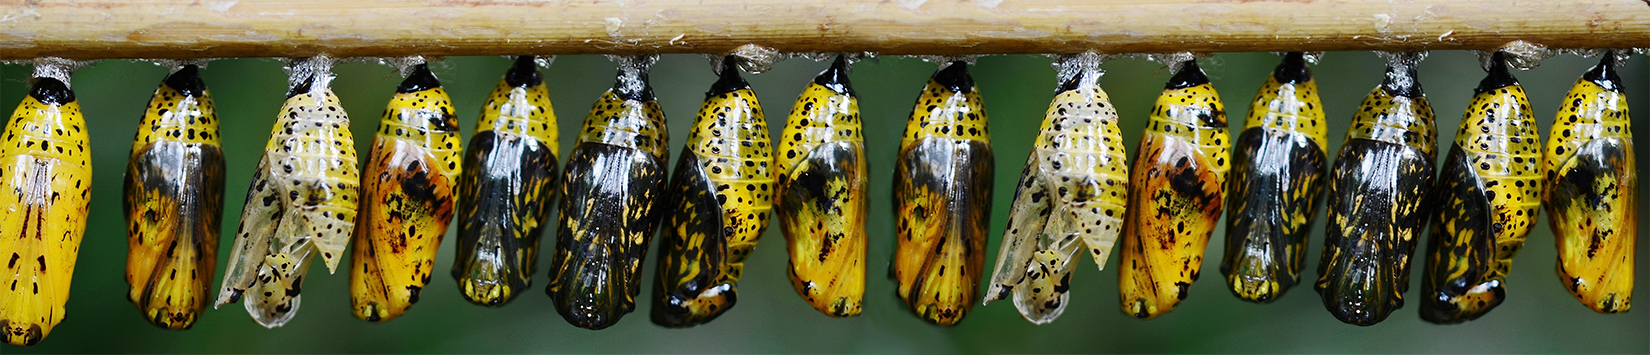 pupae hanging from a stick